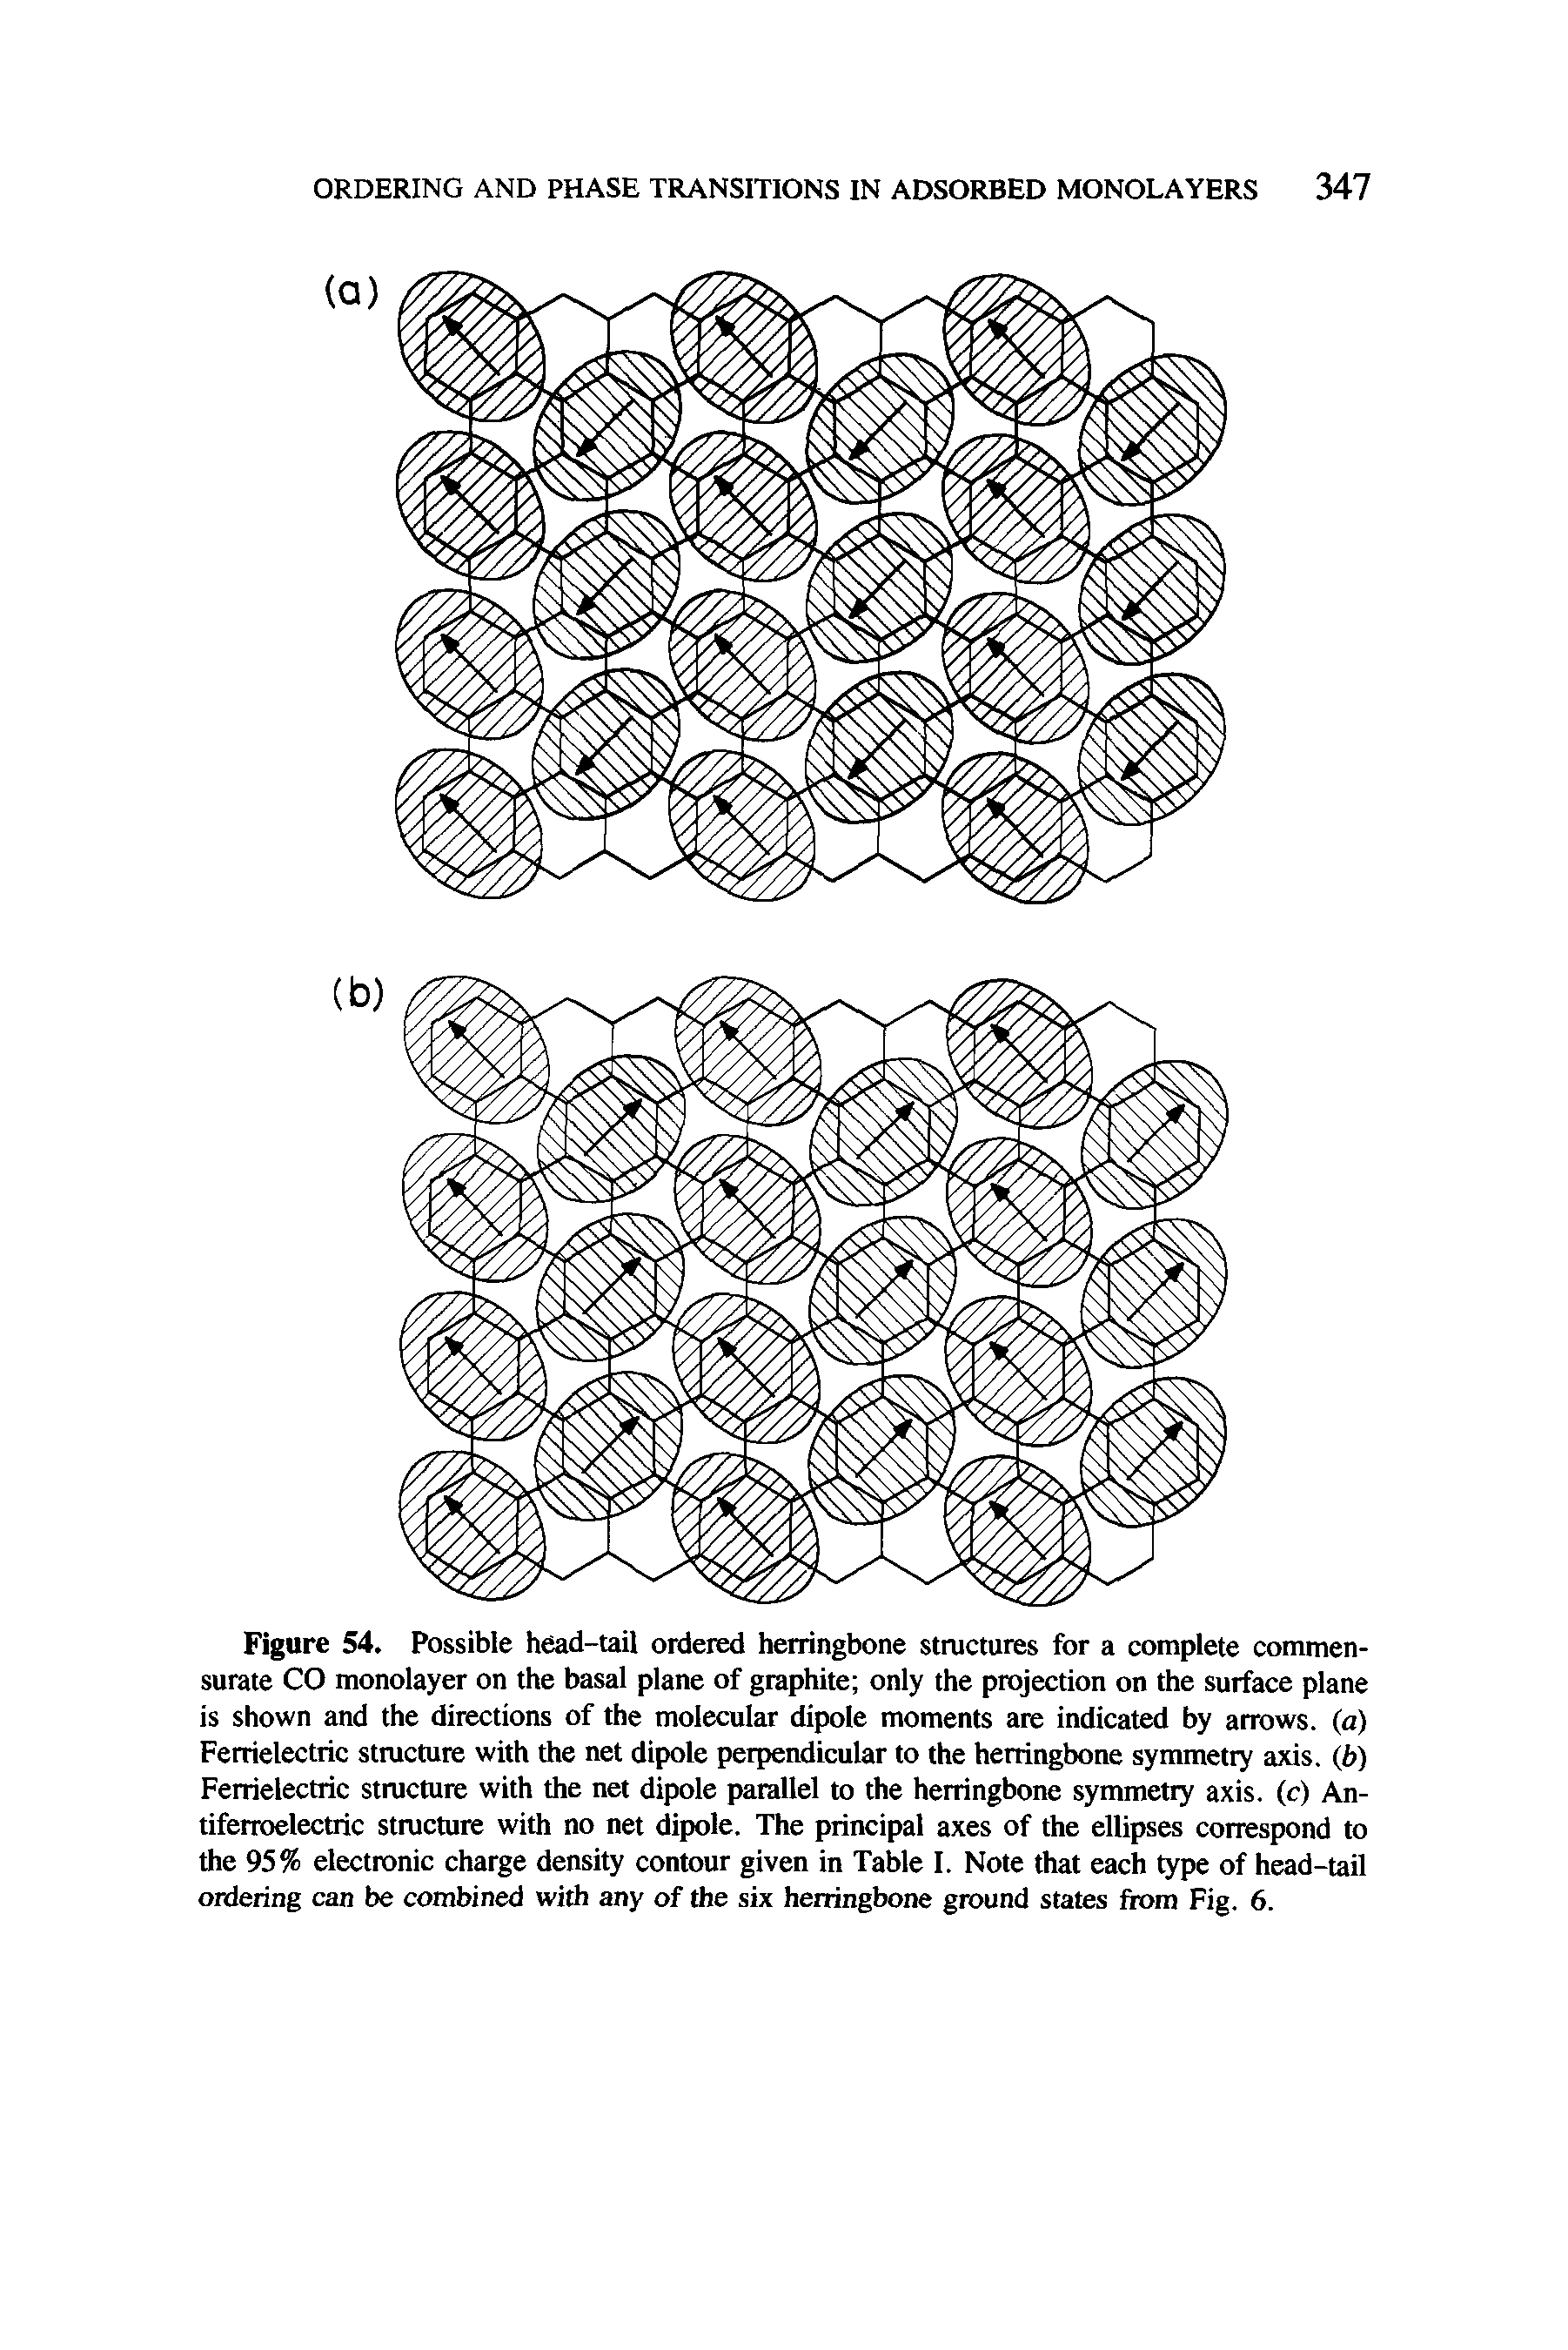 Figure 54. Possible head-tail ordered herringbone structures for a complete commensurate CO monolayer on the basal plane of graphite only the projection on the surface plane is shown and the directions of the molecular dipole moments are indicated by arrows, (a) Ferrielectric stmcture with the net dipole perpendicular to the herringbone symmetry axis, (b) Ferrielectiic structure with the net dipole parallel to the herringbone symmetry axis, (c) An-tiferroelectric structure with no net dipole. The principal axes of the ellipses correspond to the 95% electronic charge density contour given in Table I. Note that each type of head-tail ordering can be combined with any of the six herringbone ground states from Fig. 6.